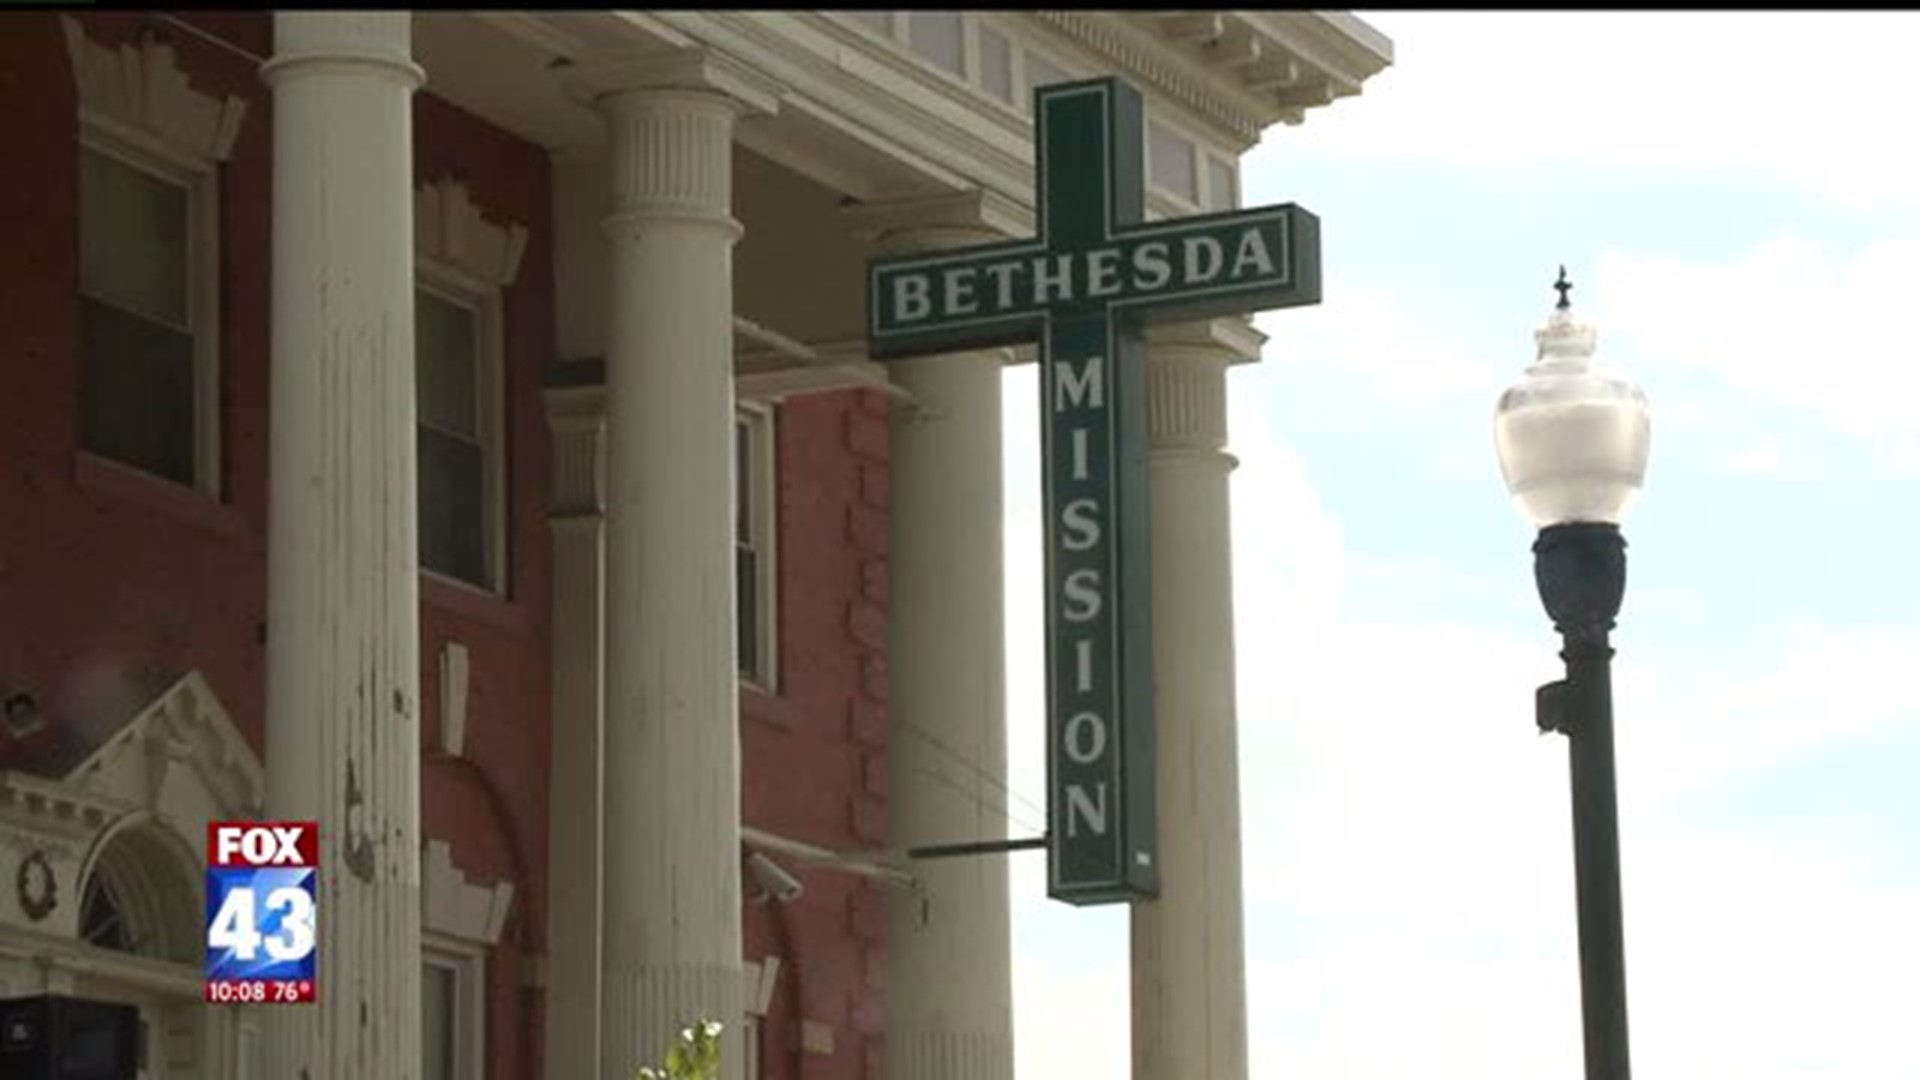 Bethesda Mission Holds Block Party